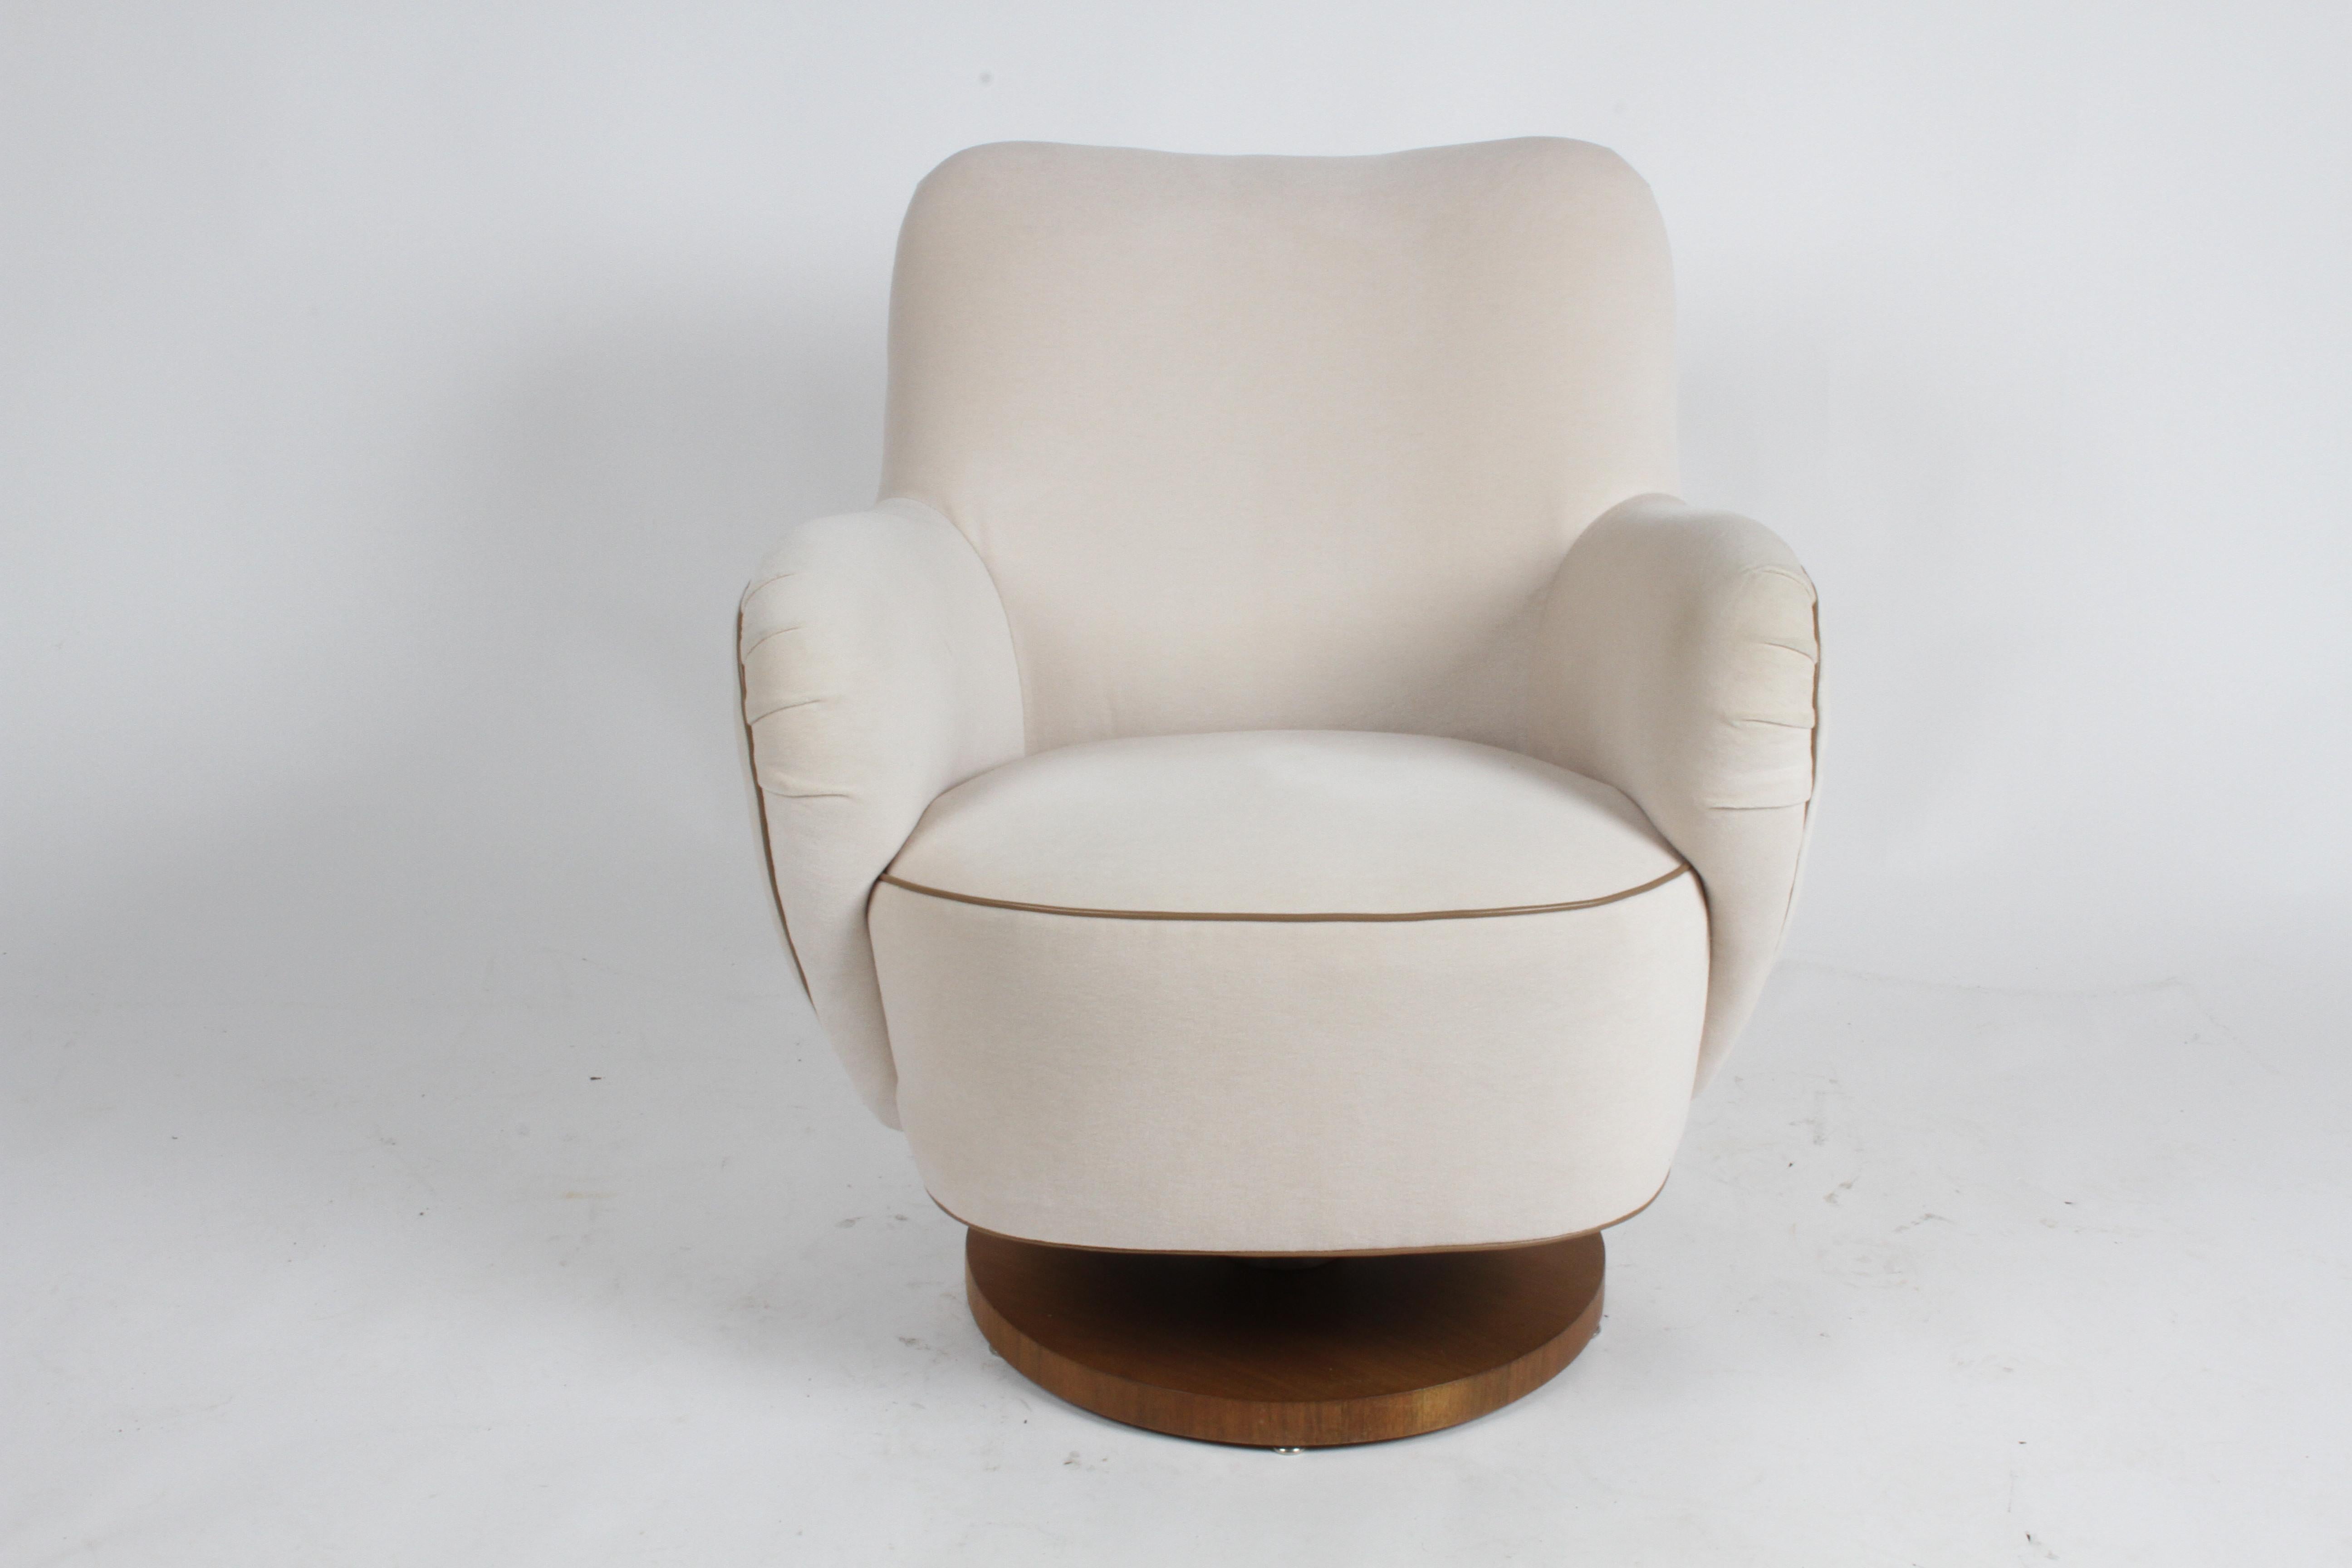 Vladimir Kagan barrel lounge chair model 100-S with tilt and walnut wood base. It was reupholstered in 2017 using Great Plains [Holly Hunt] “Next Generation – Winter White” [1607/01], which is 50% wool, 30% alpaca, and 20% silk. The contrast leather